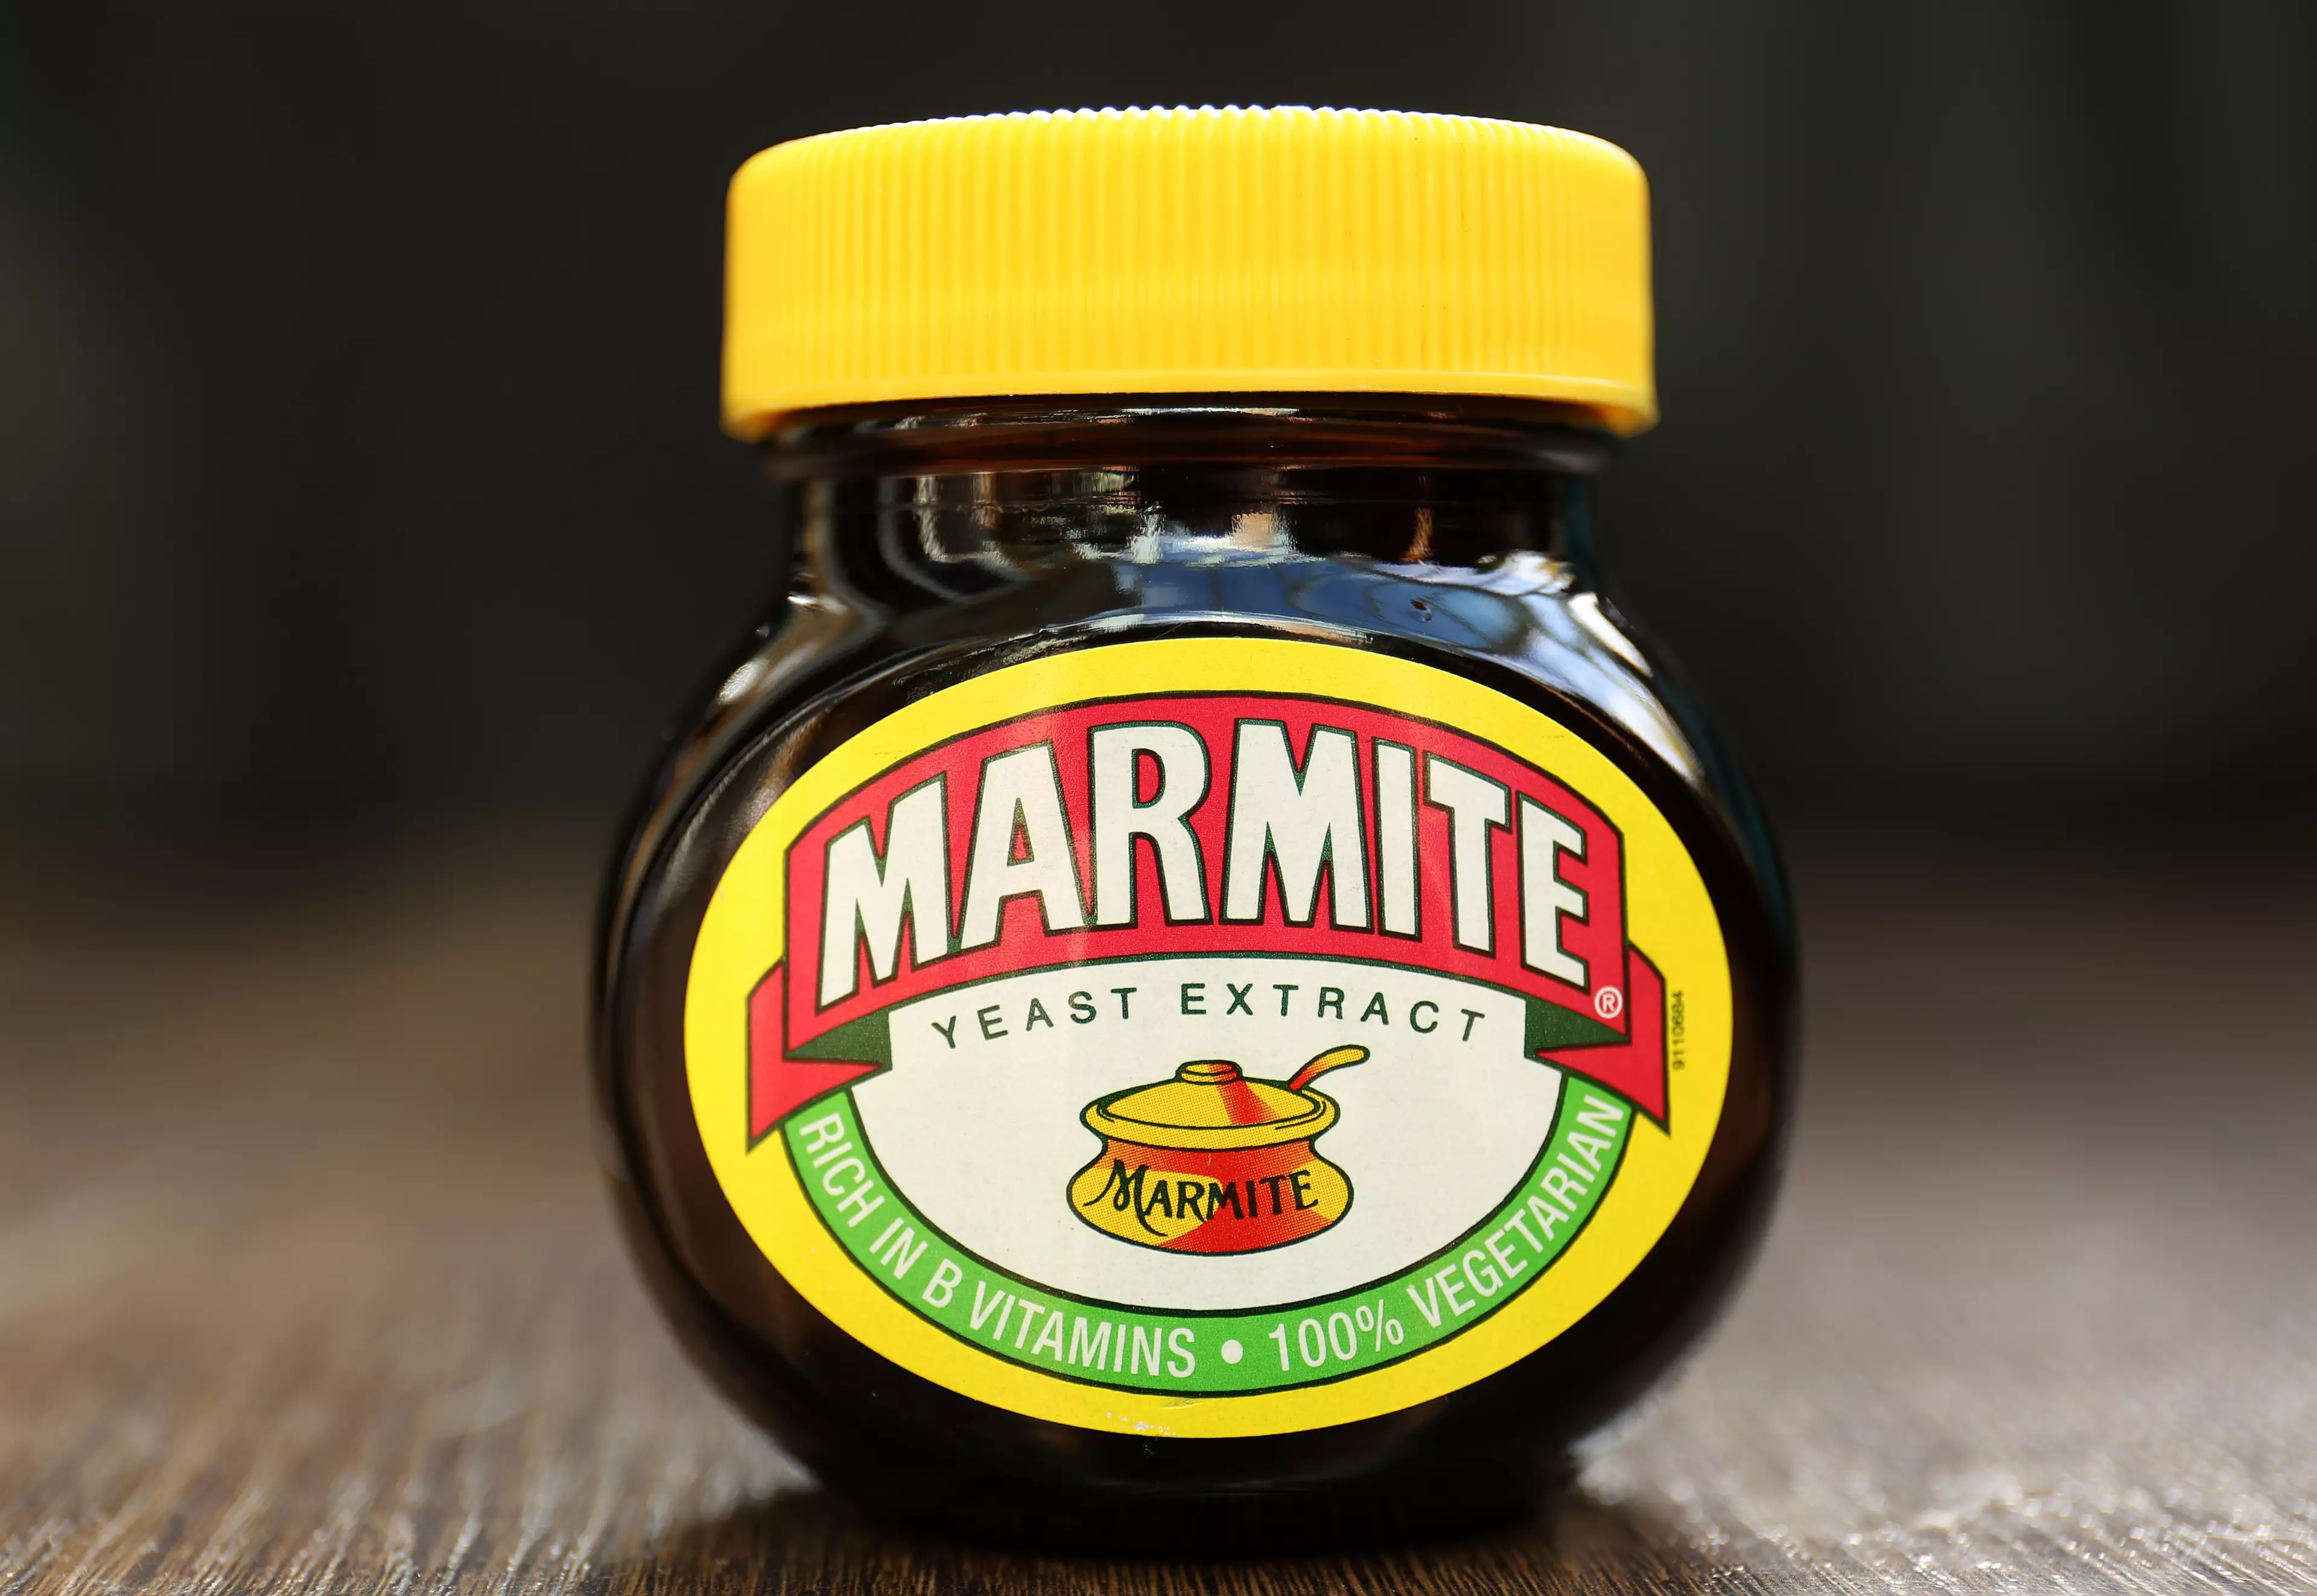 Love it or hate it, Marmite is here to stay (